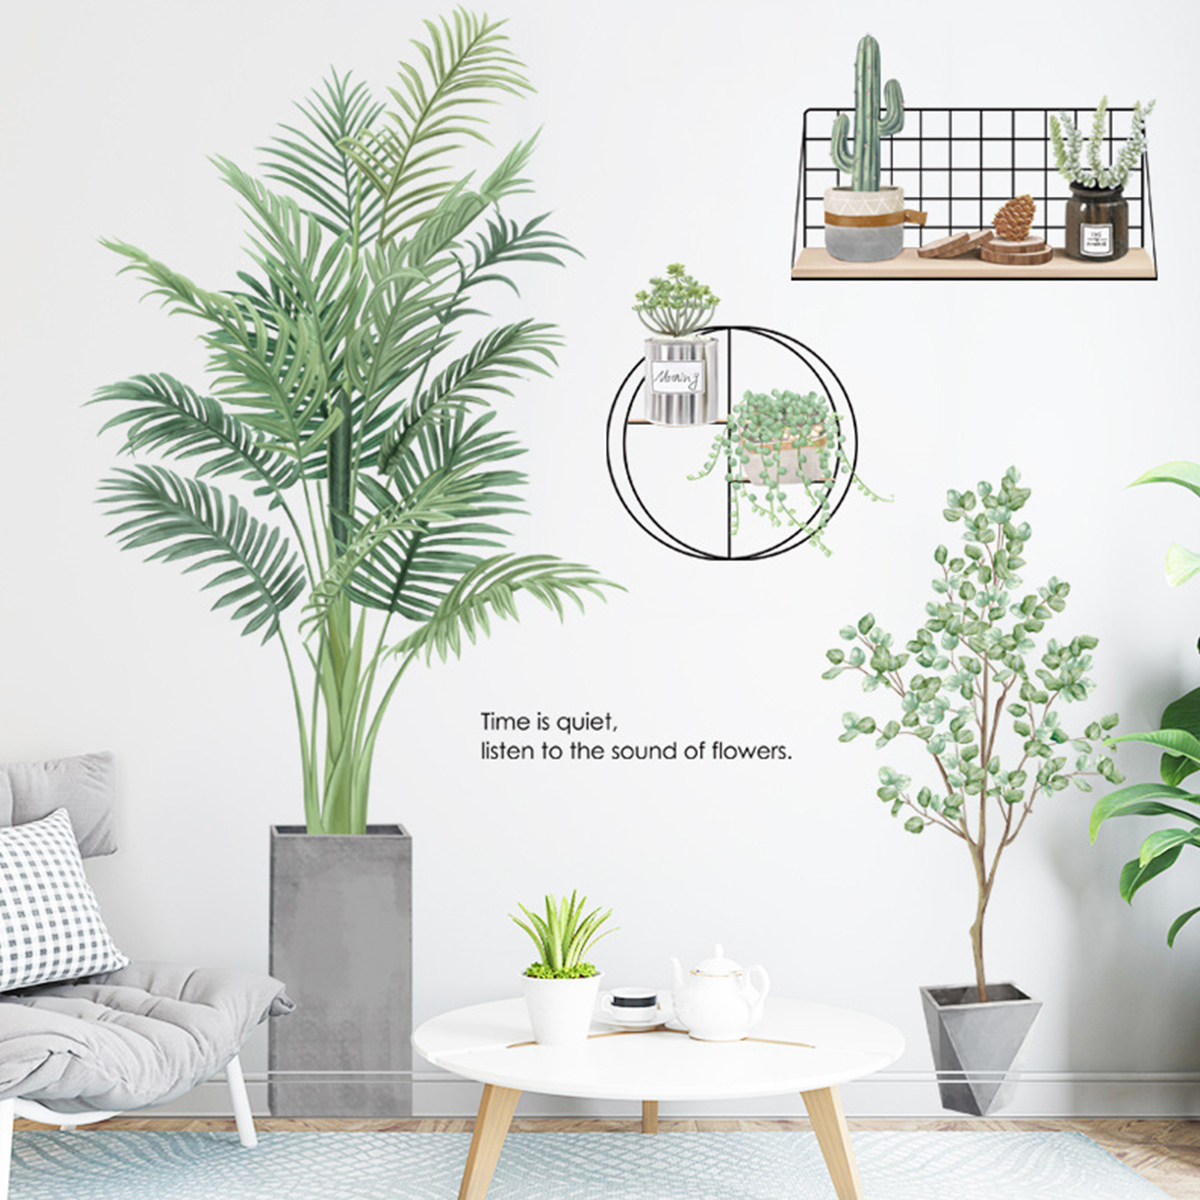 Green-Leaves-Wall-Stickers-Waterproof-Removable-Wall-Decal-Home-Office-Living-Room-Bedroom-Wall-Deco-1774850-6